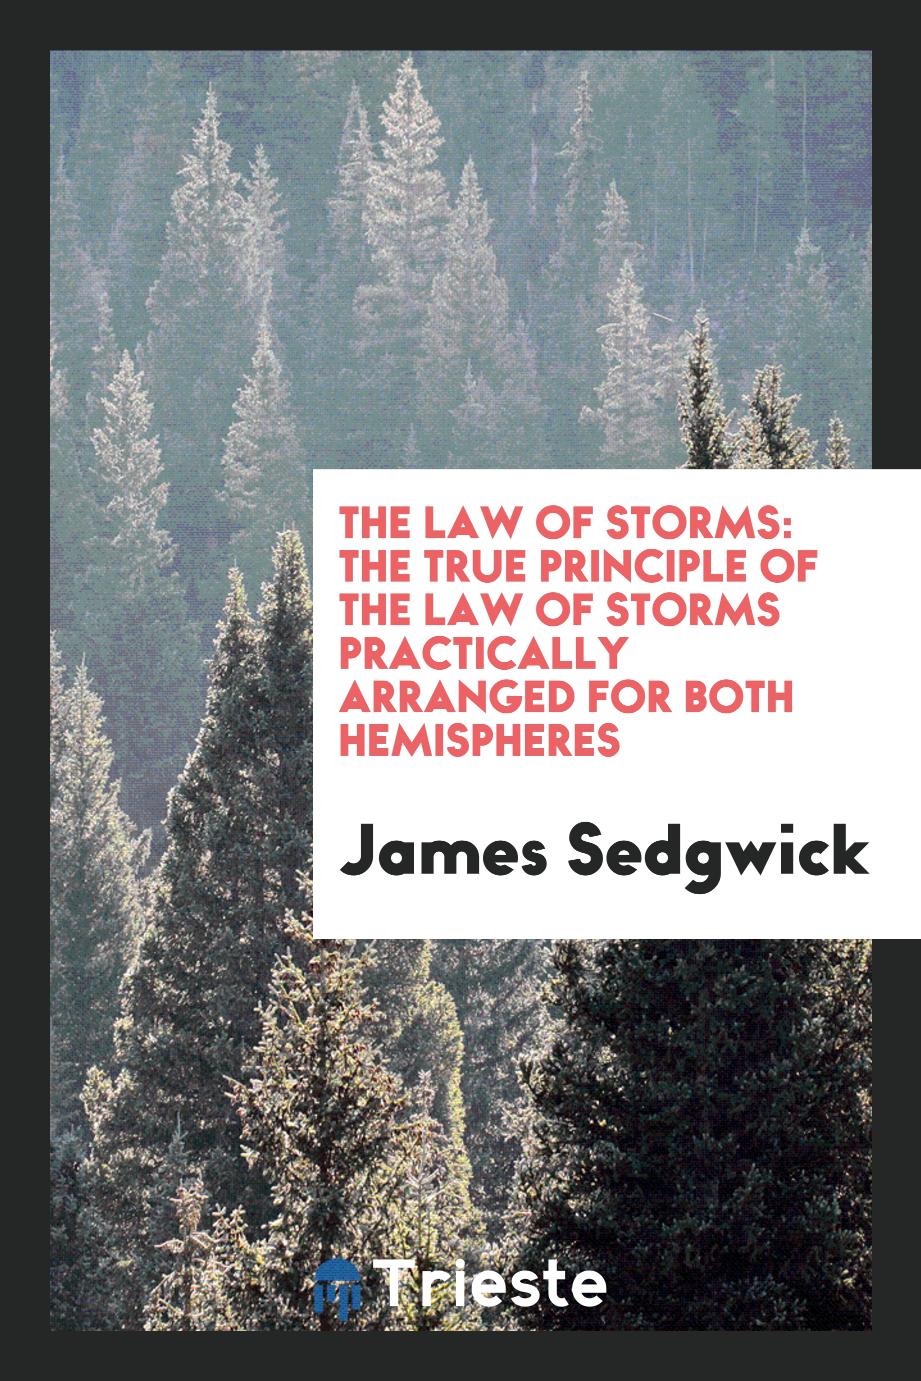 The Law of Storms: The True Principle of the Law of Storms Practically Arranged for Both Hemispheres